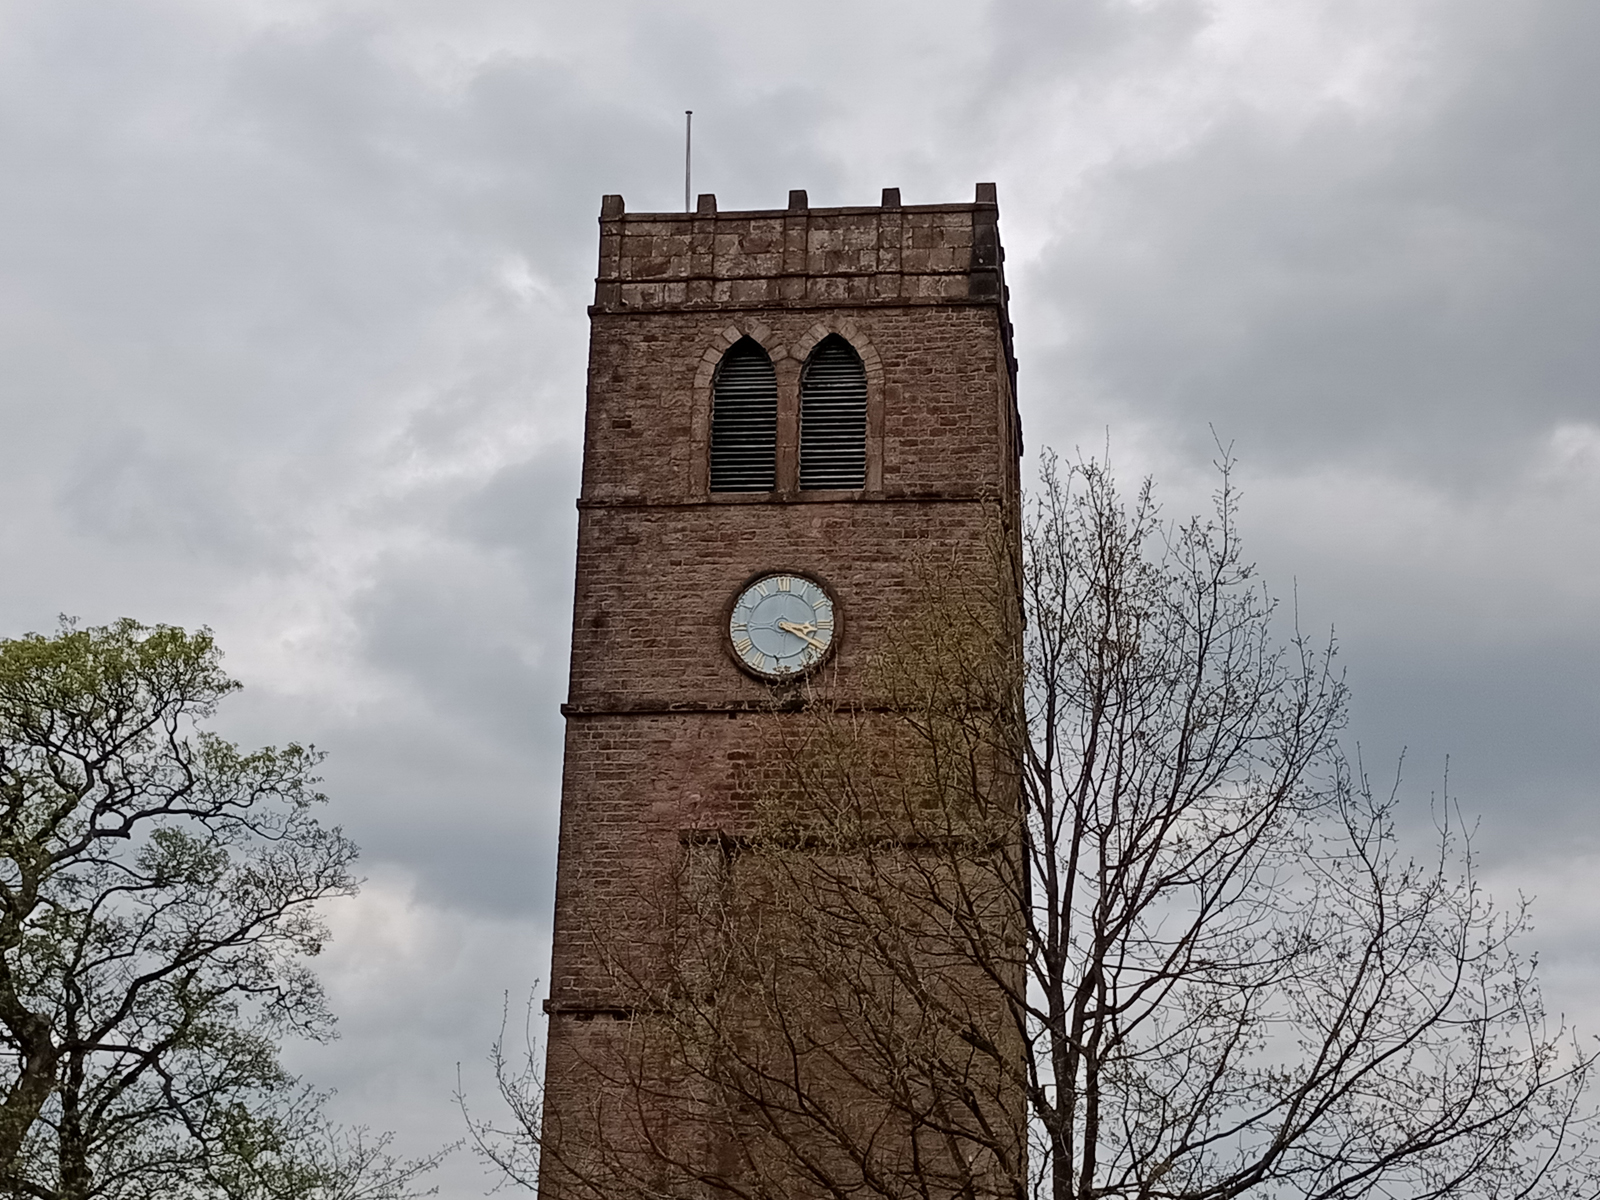 Moto G22 camera sample showing a church tower zoomed in